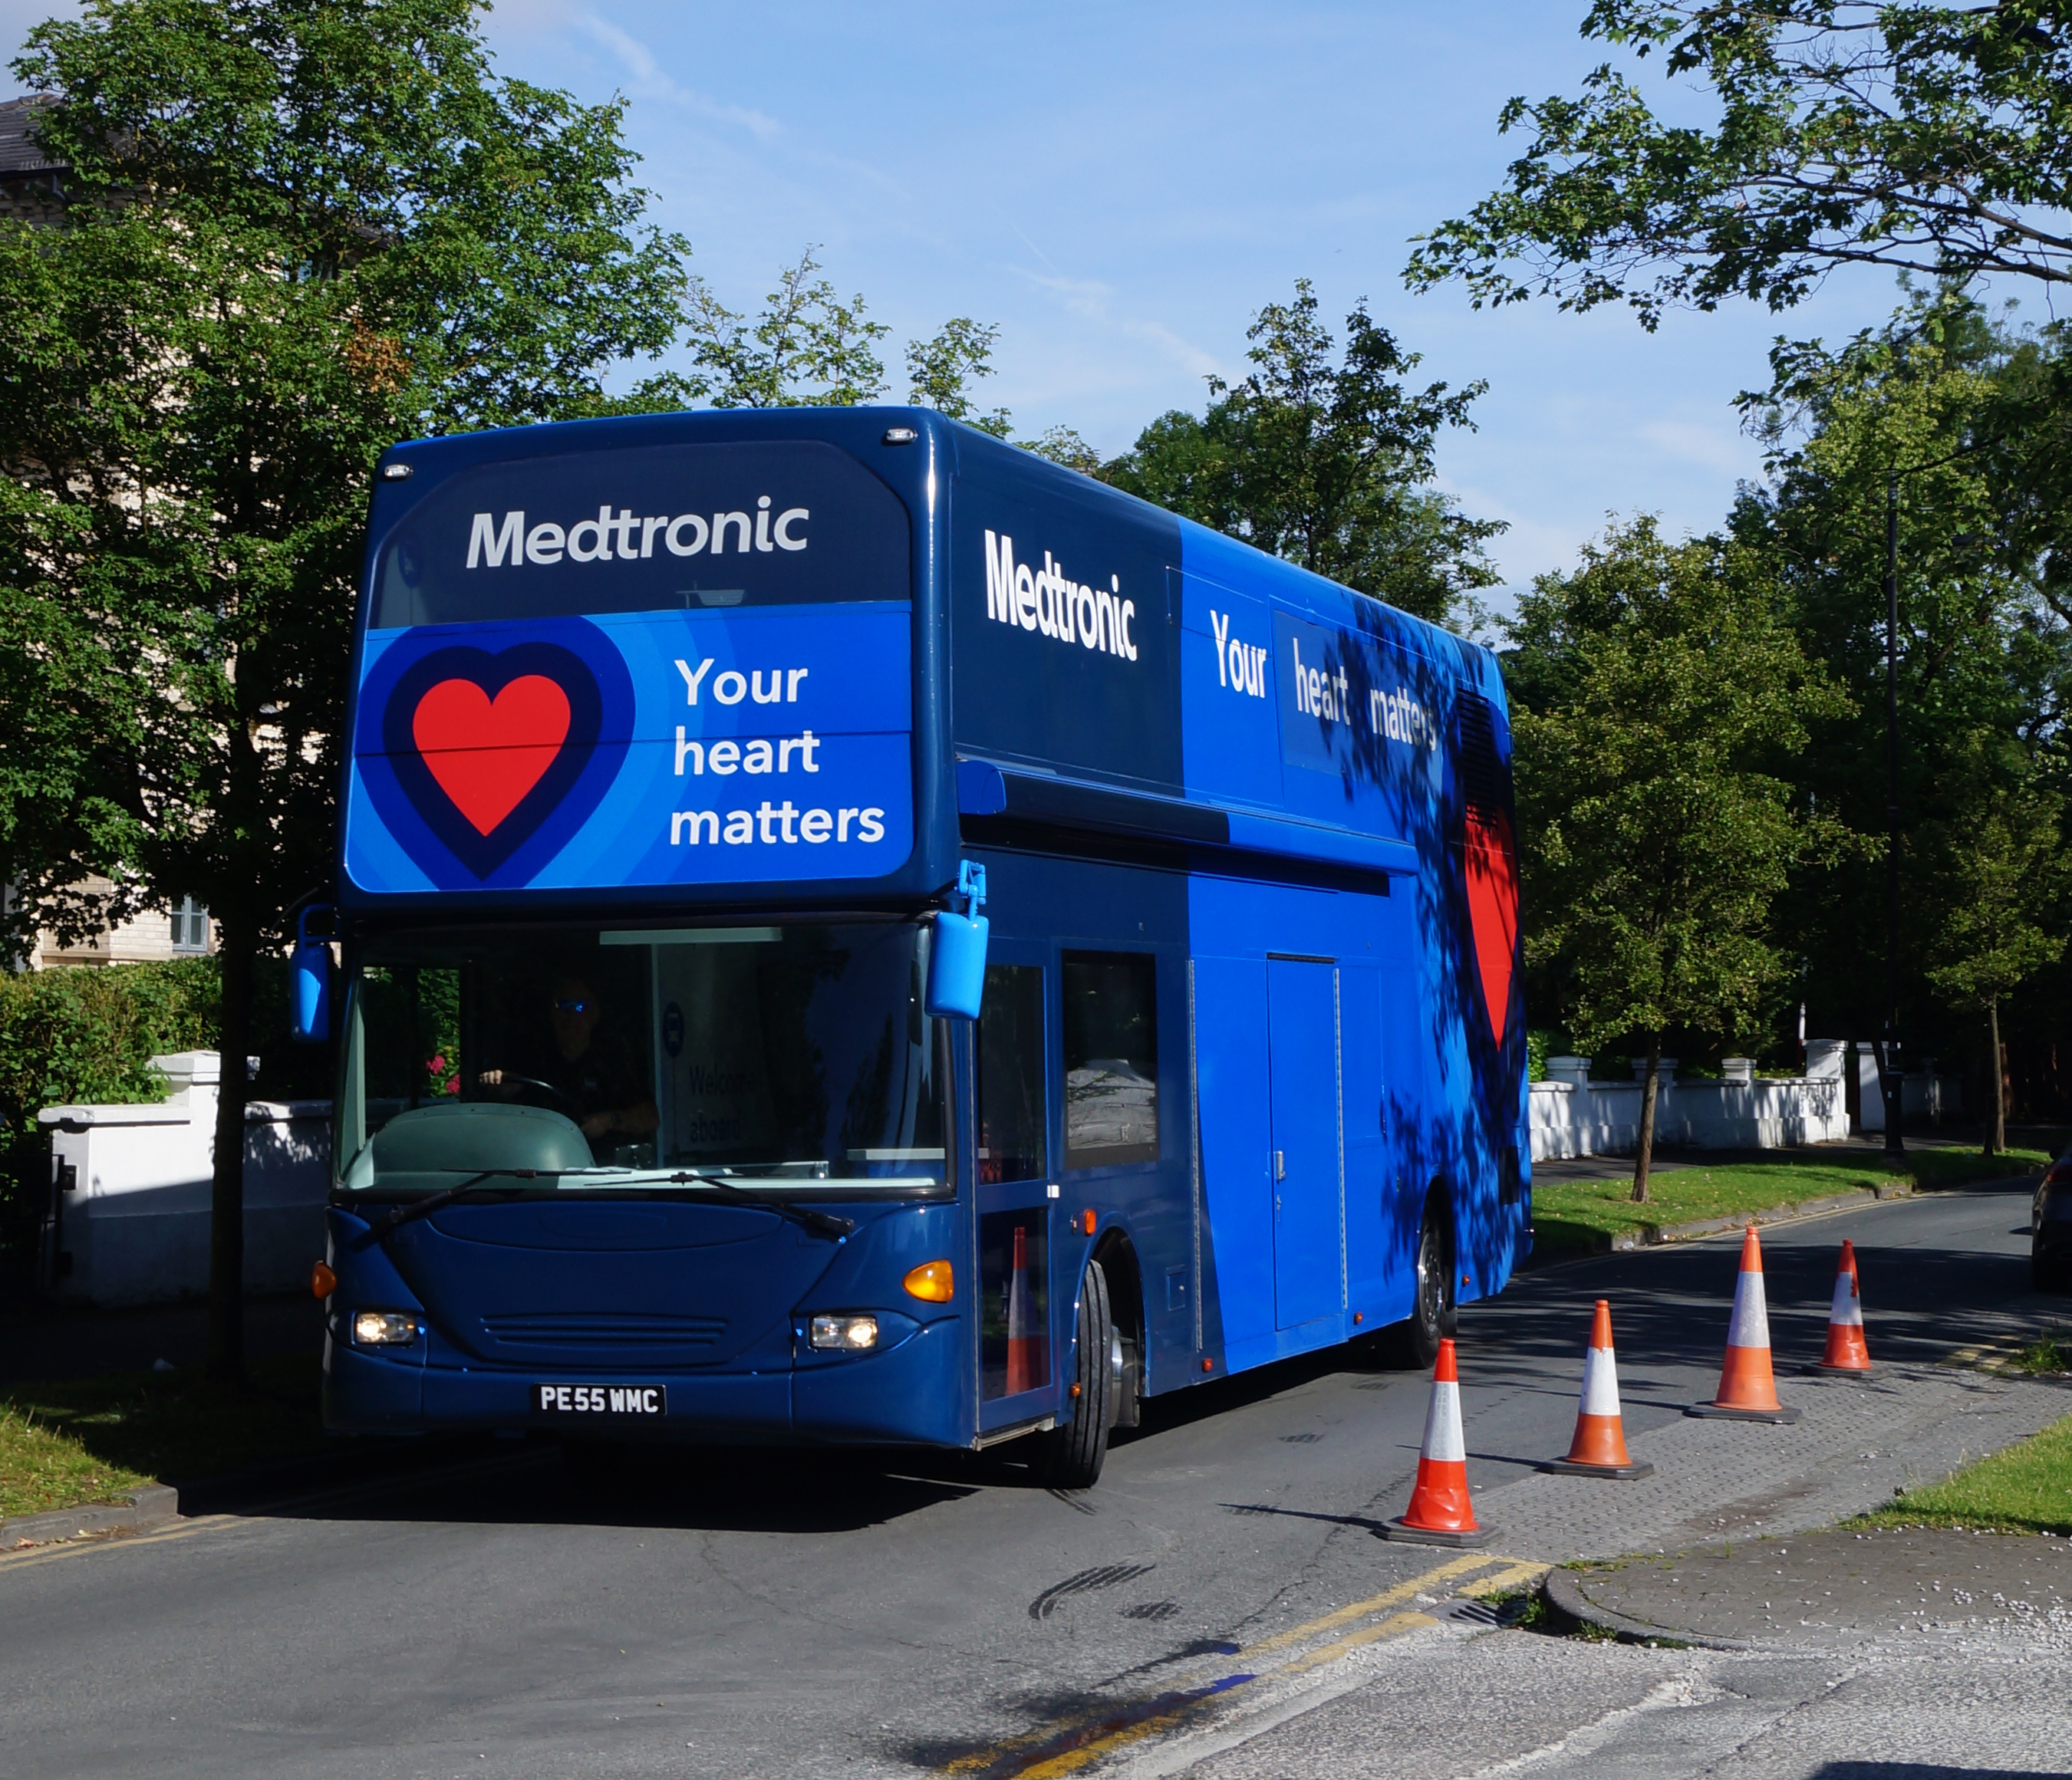 LumiraDx participates in the Healthy Heart Bus Initiative with innovative, fingerstick blood NT-proBNP test